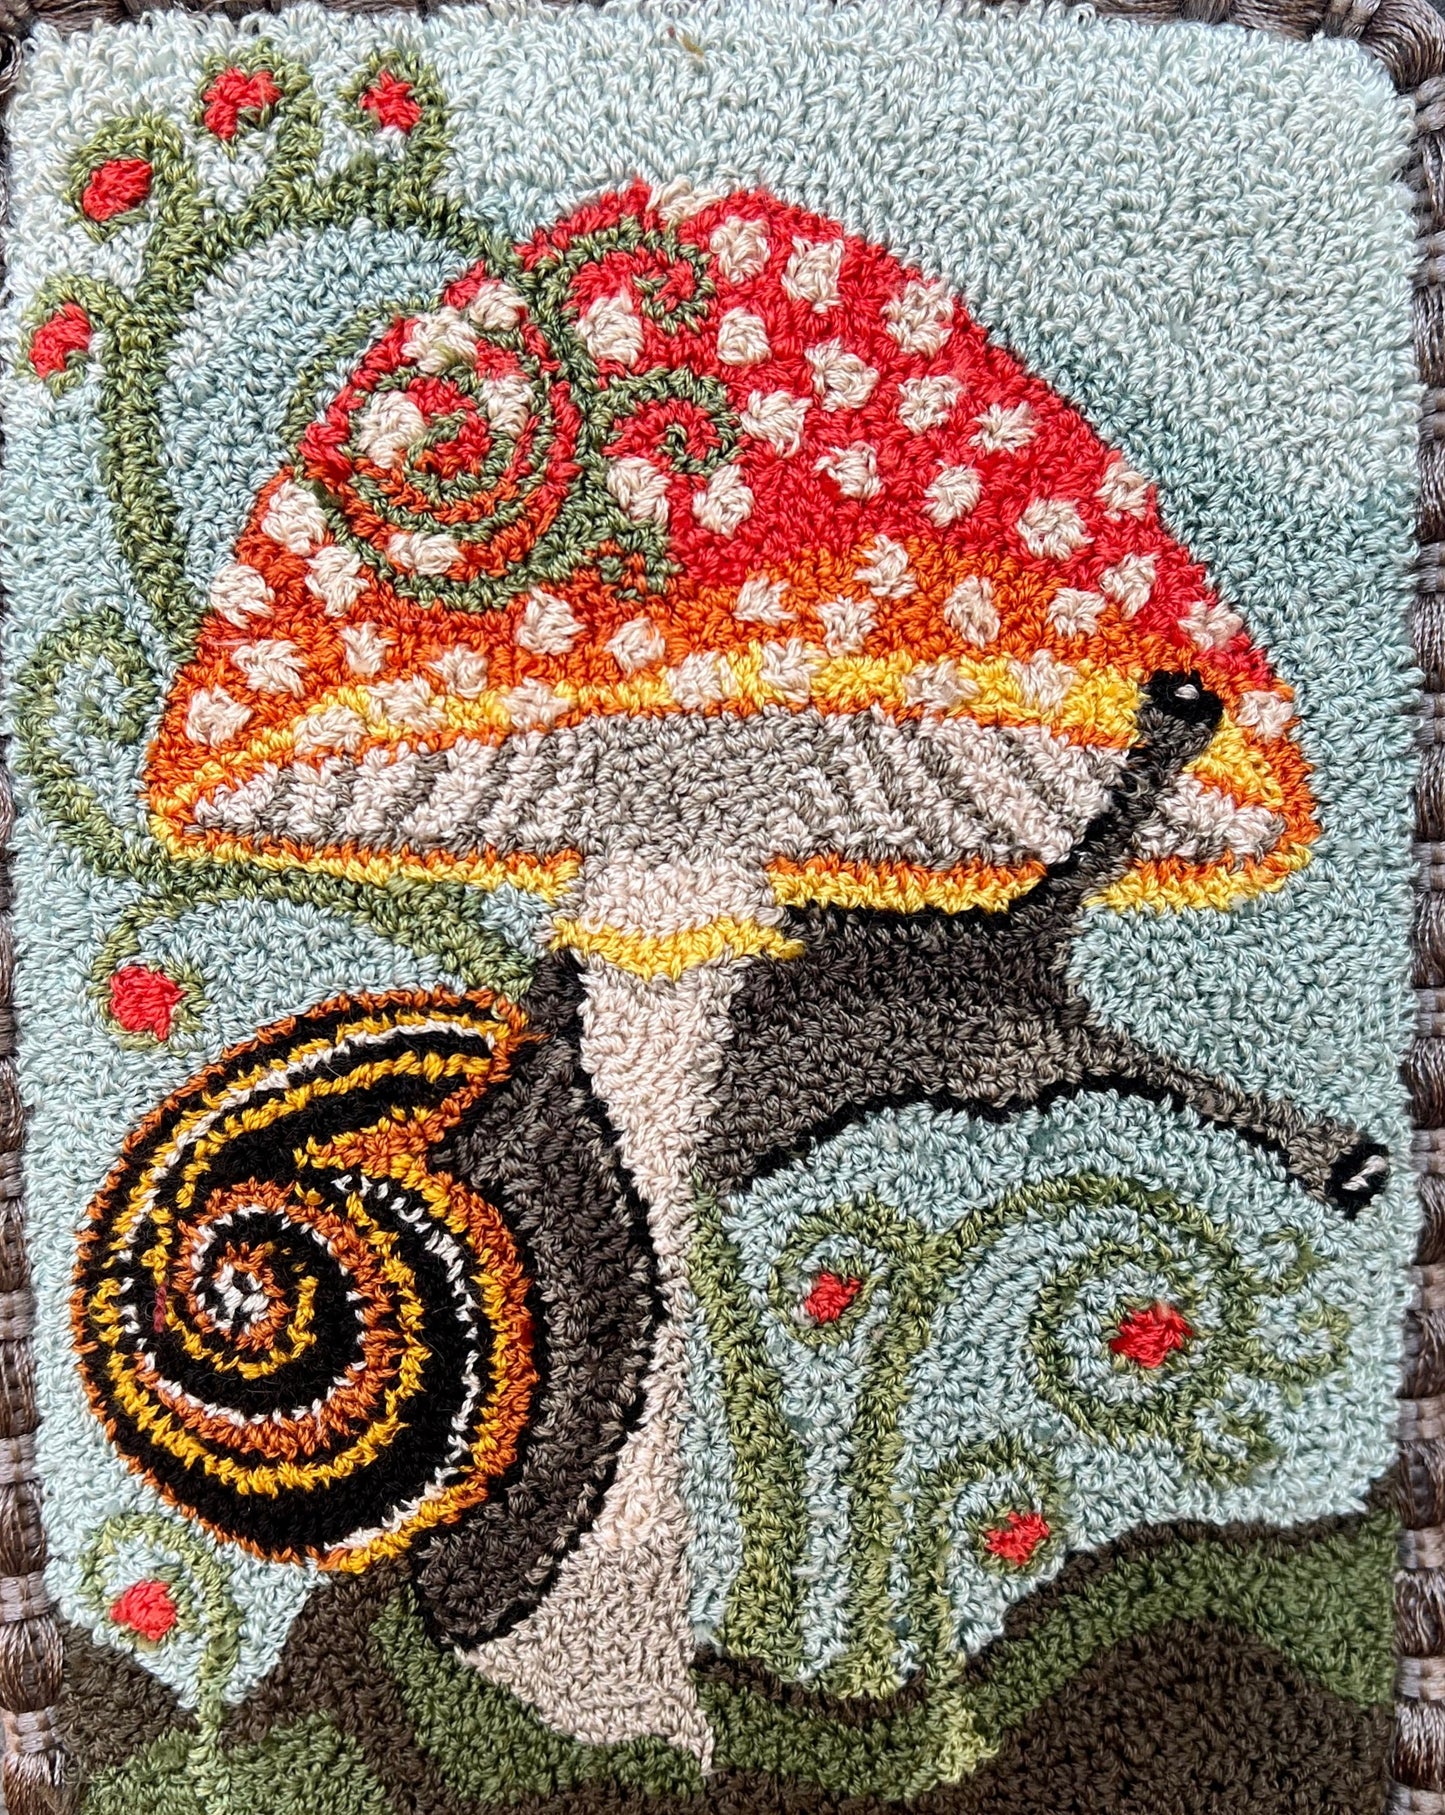  Presenting the enchanting "ENTWINED" Paper Rug Hooking Pattern by Orphaned Wool. This delightful design showcases a charming snail gracefully wrapping around a vibrant mushroom. This fabulous paper pattern offers you the opportunity to bring the wonders of nature to life and create the perfect size pattern you desire. The Entwined pattern is copyrighted 2024 Kelly Kanyok, Orphaned Wool.